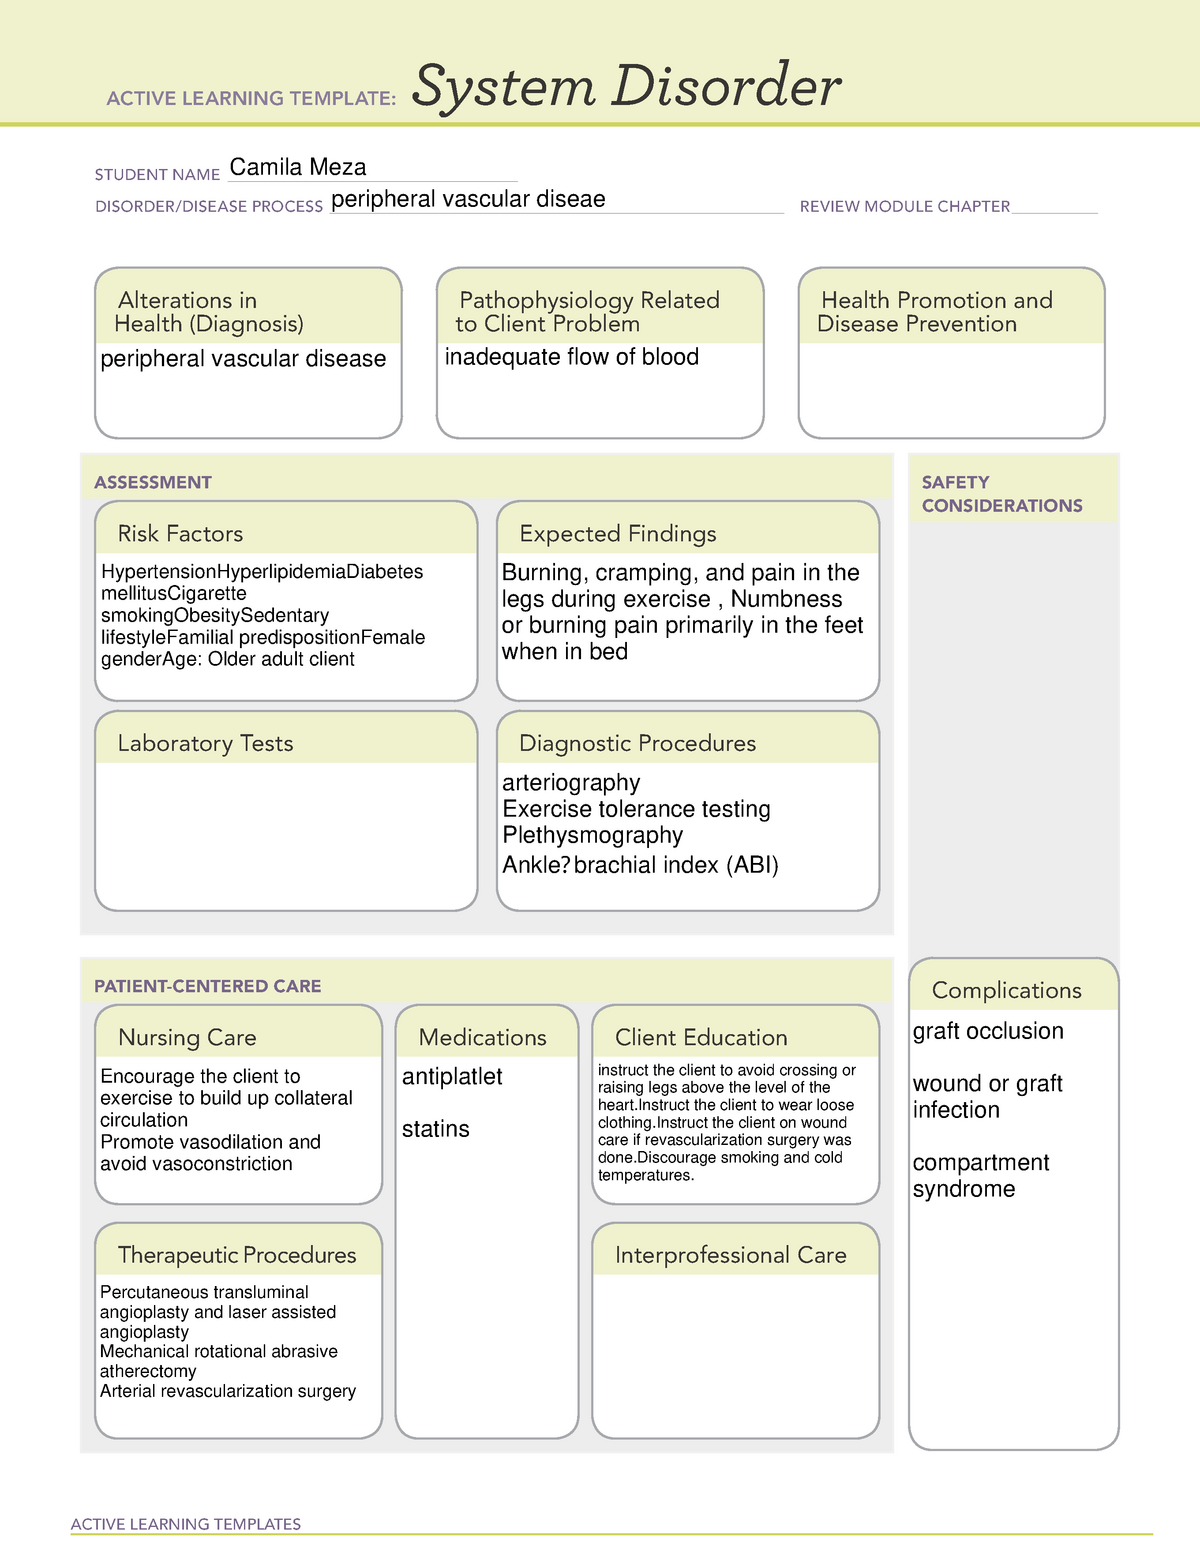 Remediation 20- peripheral vascular disease - ACTIVE LEARNING TEMPLATES ...